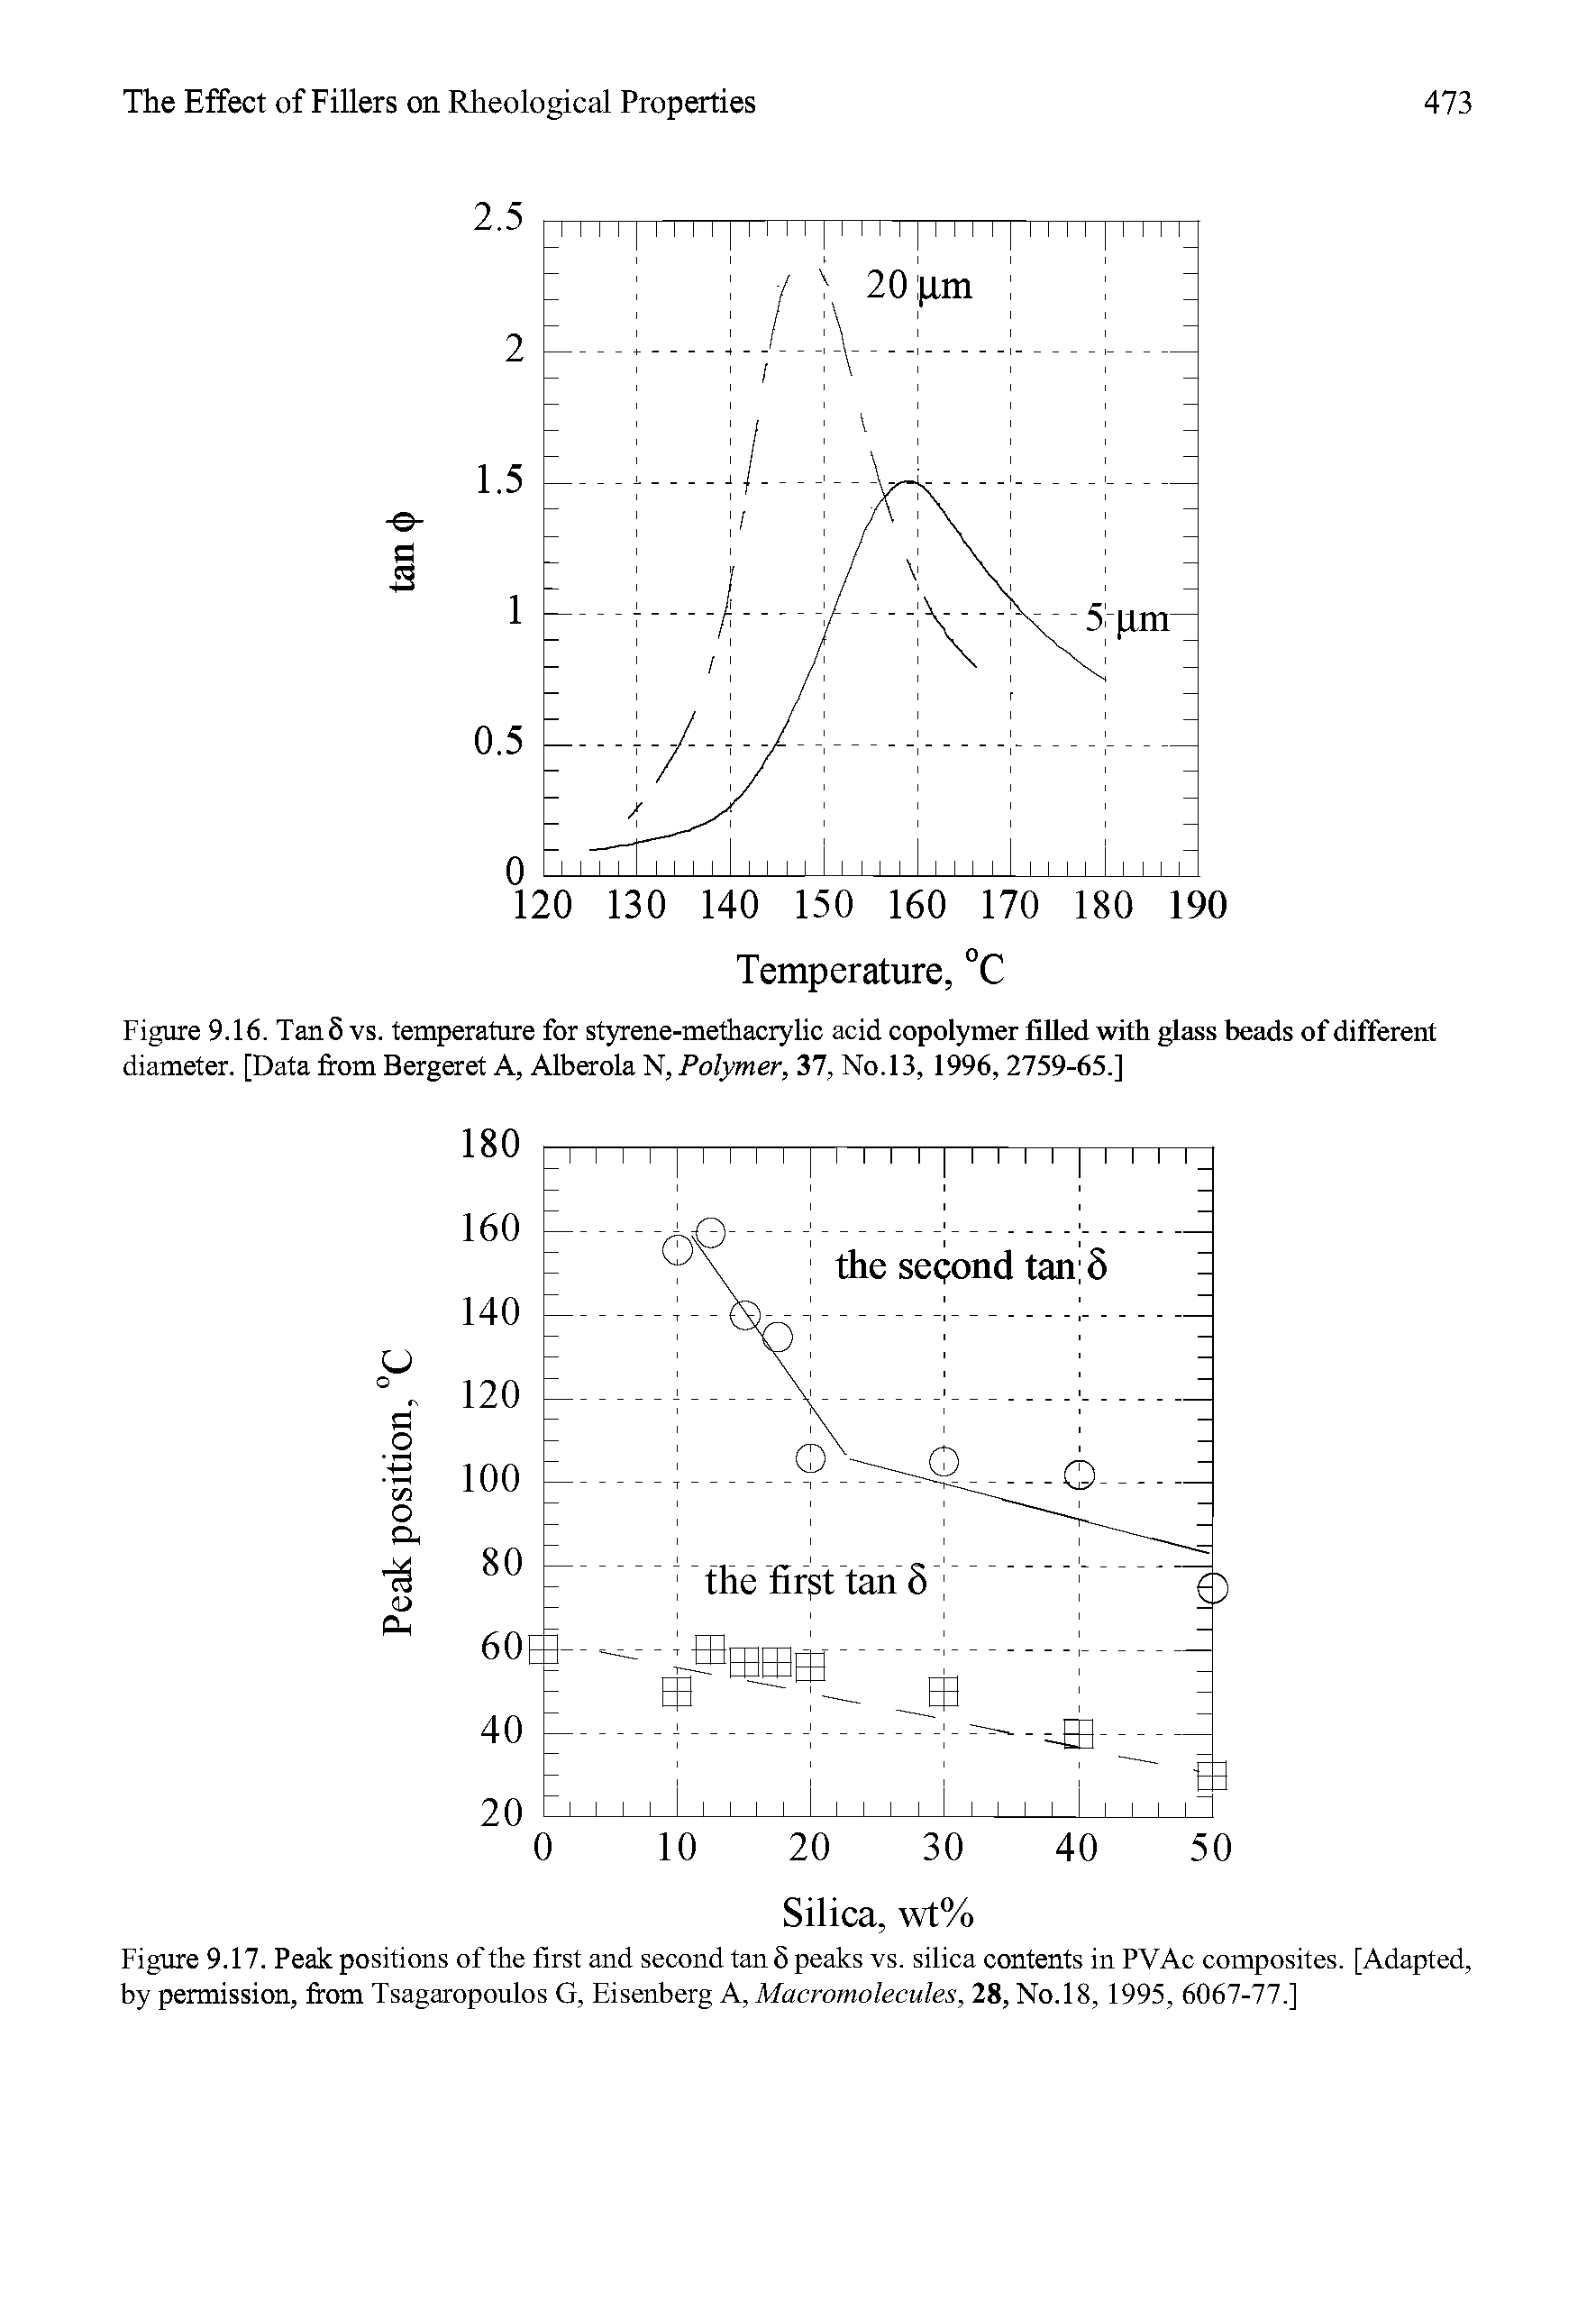 Figure 9.16. Tan 5 vs. temperature for styrene-methacrylic acid copolymer Ii lied with glass beads of different diameter. [Data from Bergeret A, Alberola N, Polymer, 31, No.13, 1996, 2759-65.]...